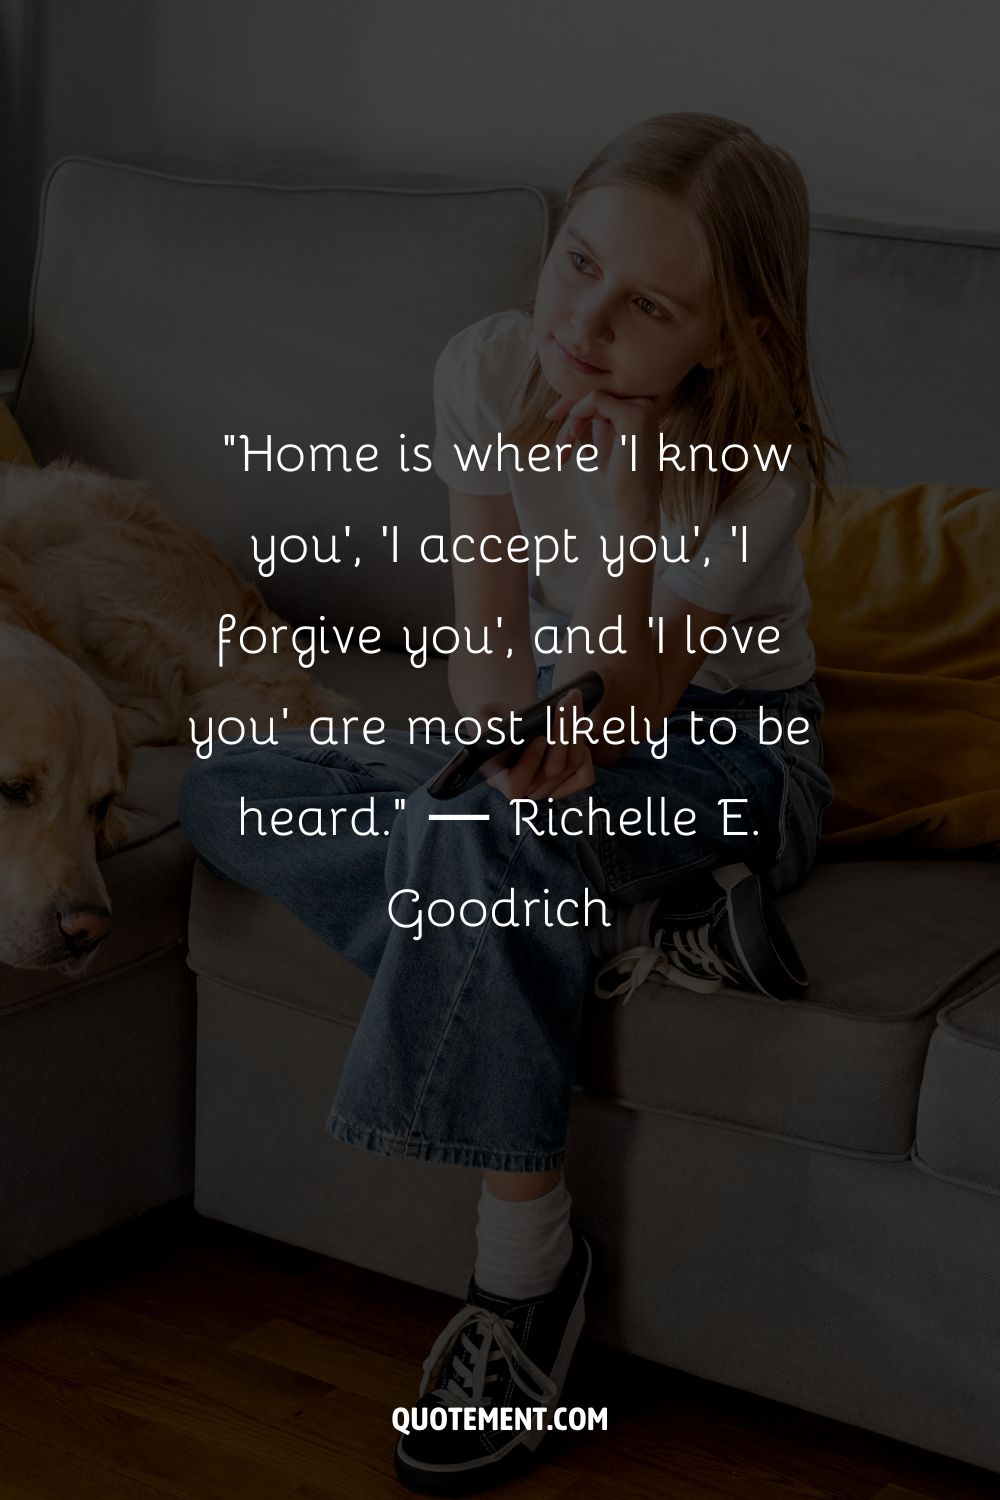 A girl with a thoughtful expression seated next to a resting golden retriever
